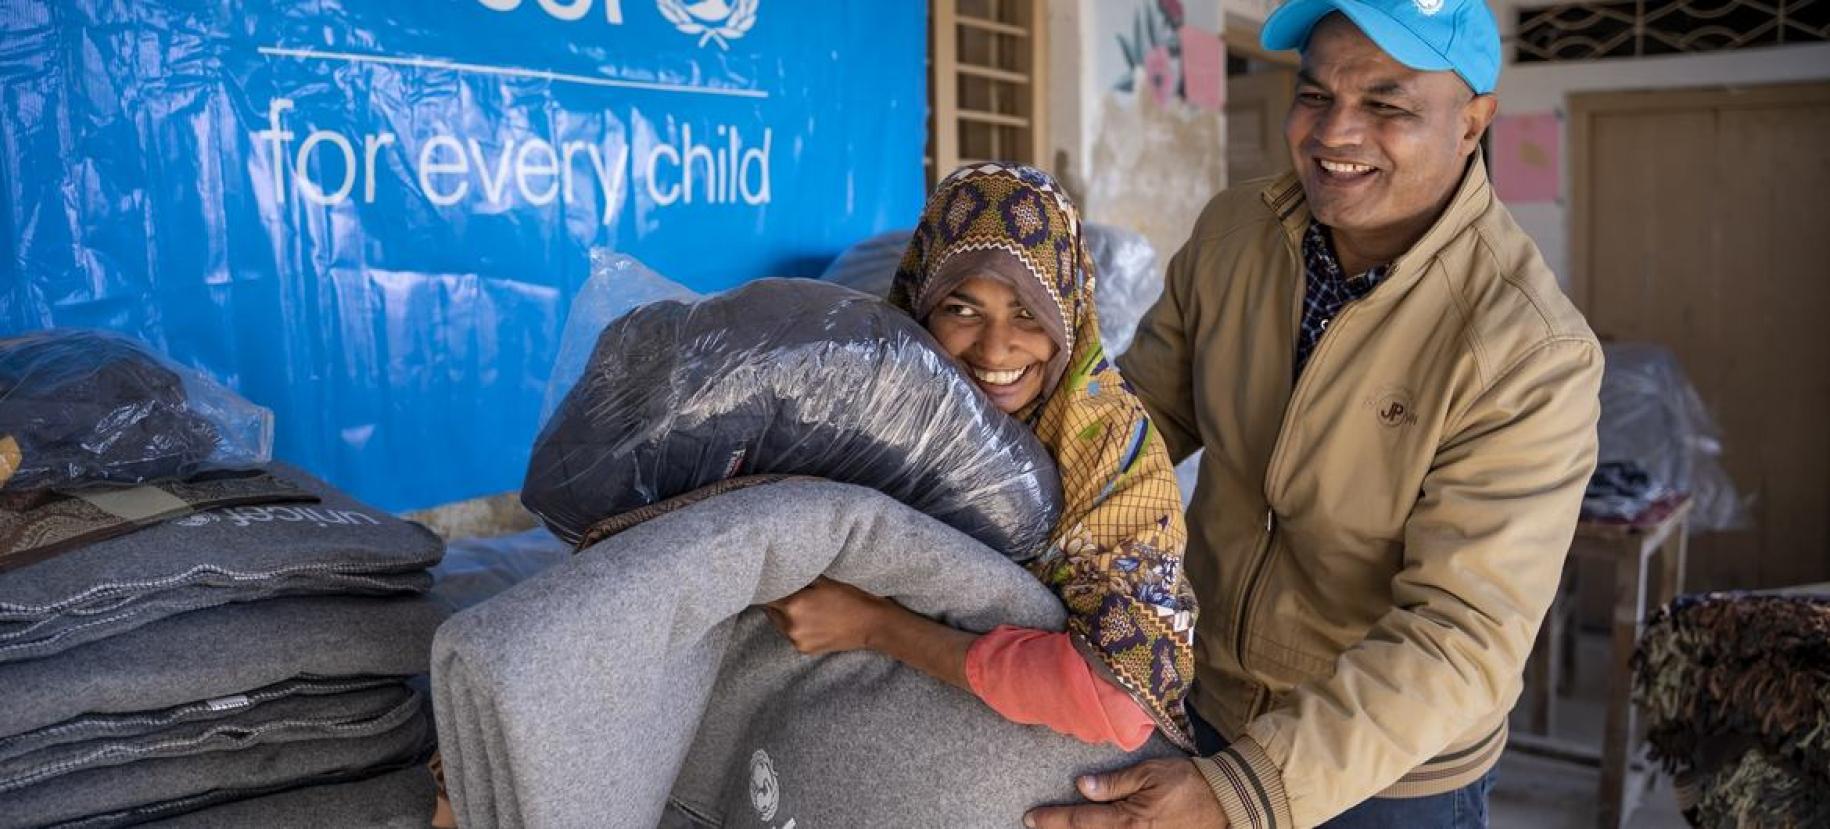 A man and a girl hold blankets and smile in front of a UNICEF sign.